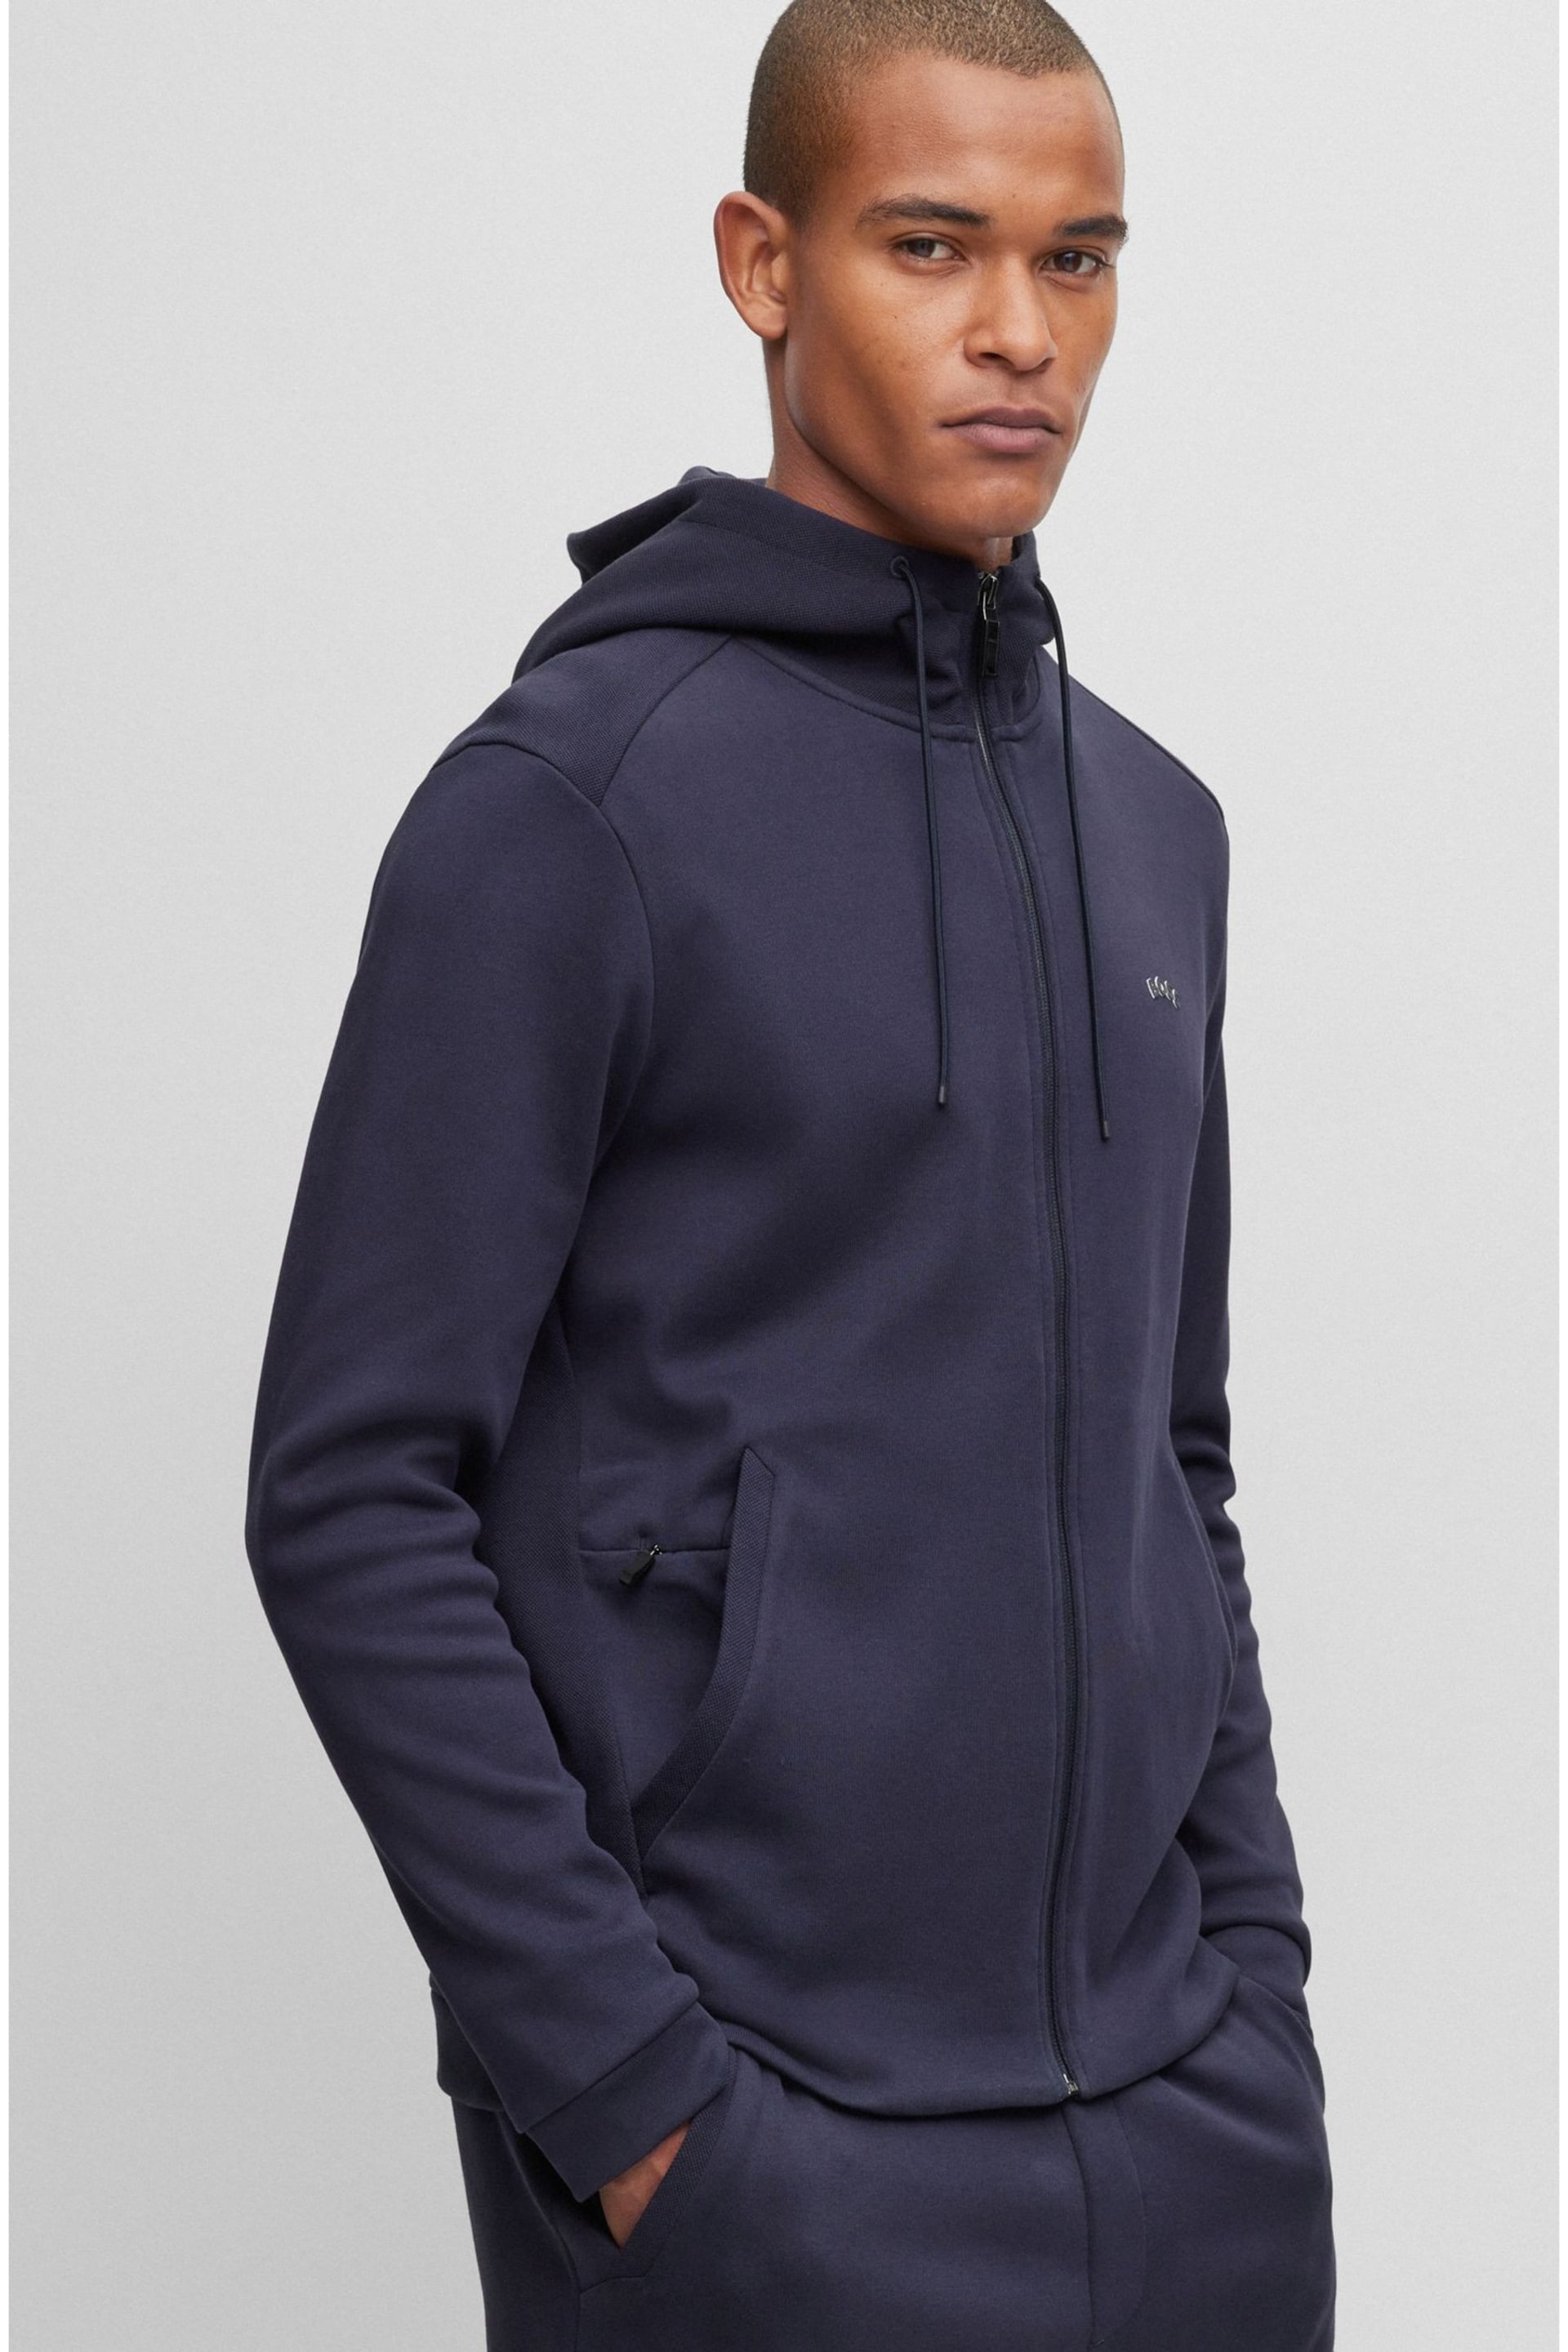 BOSS Blue Curved Layered Logo Tracksuit Zip Throught Hoodie - Image 3 of 5